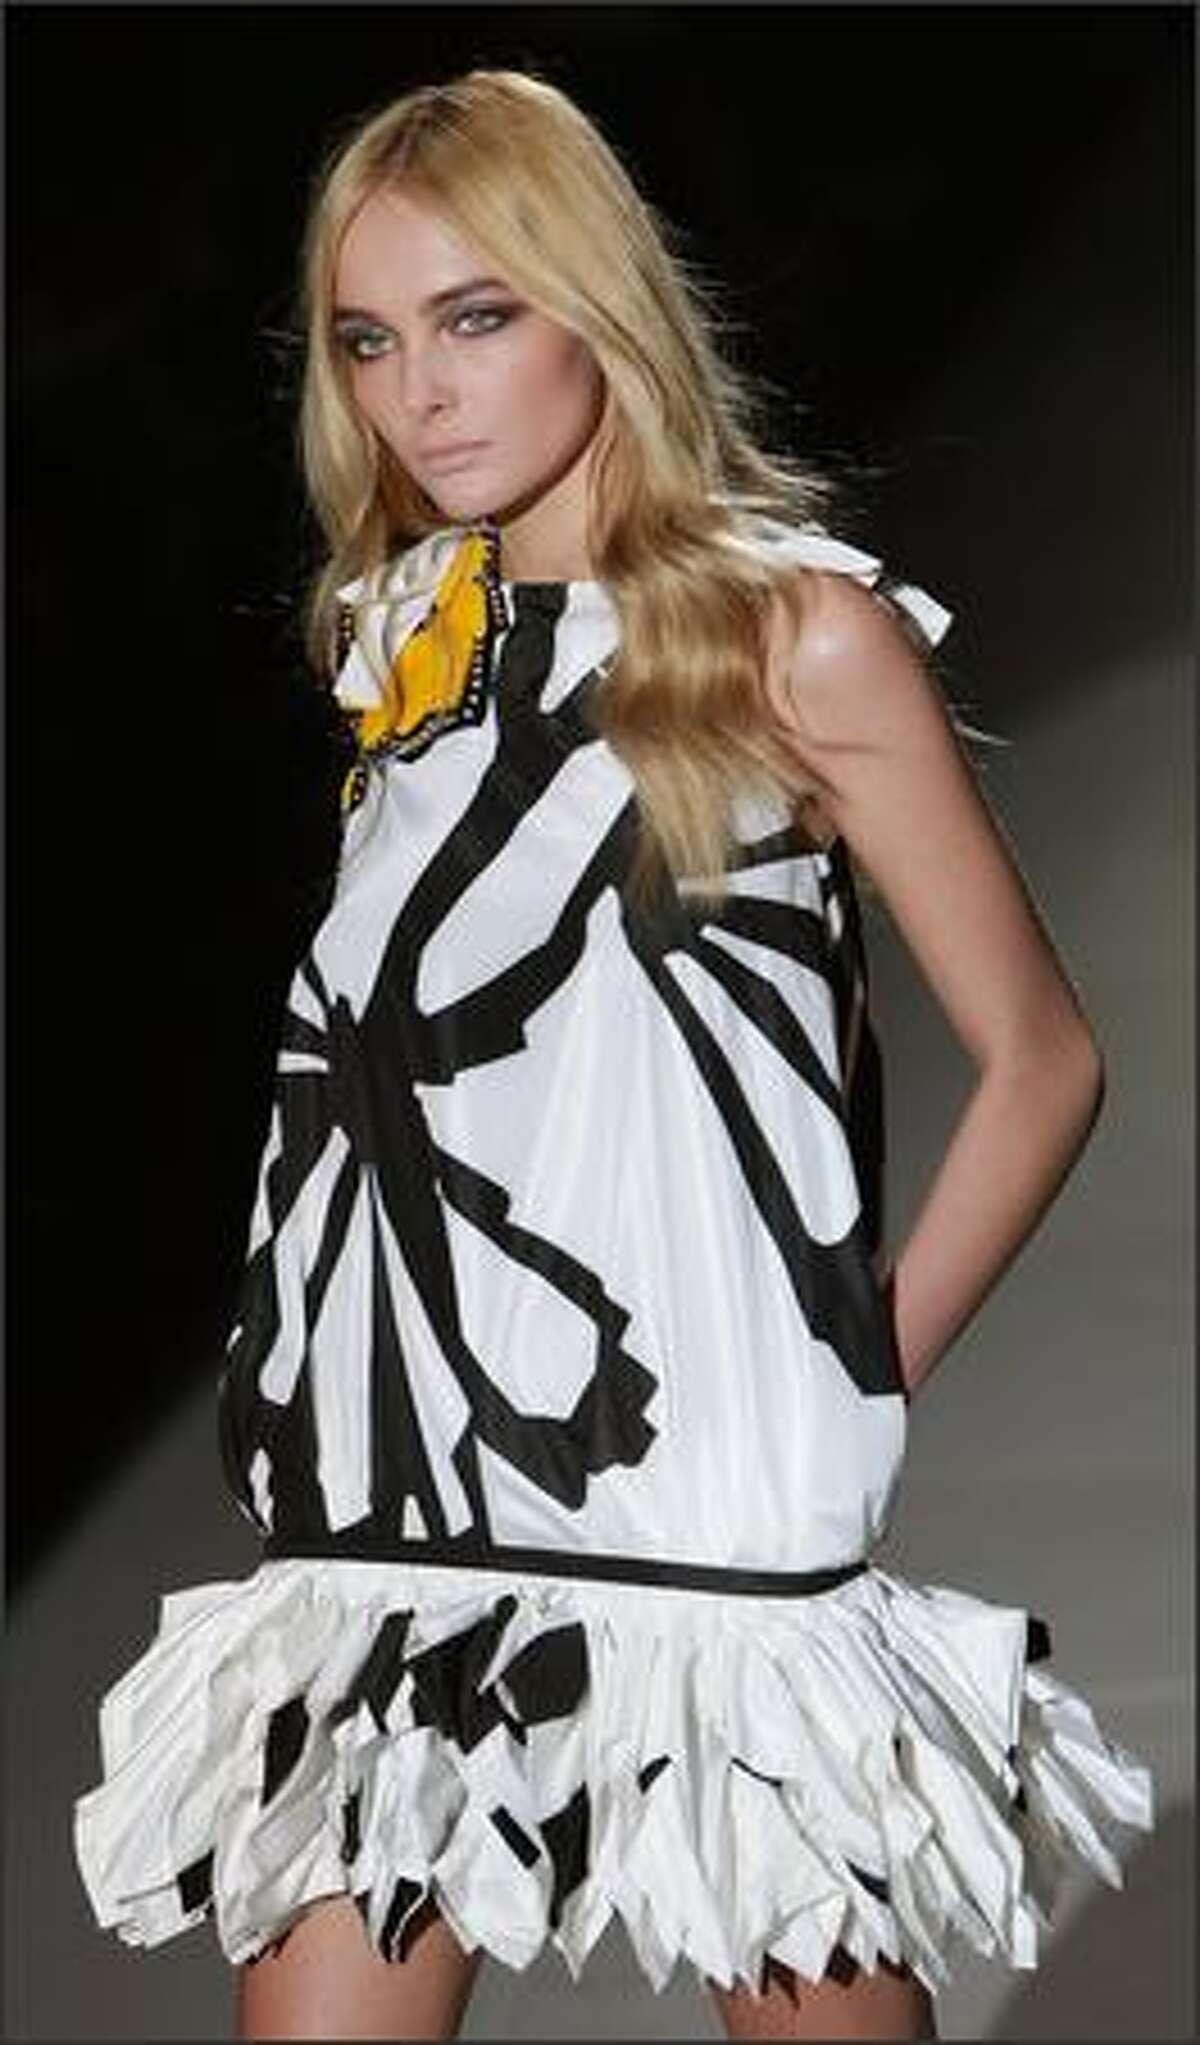 A model presents a creation by Italian designer Frida Giannini for Gucci during the Spring/Summer 2008 collections of the Milan ready-to-wear fashion shows.